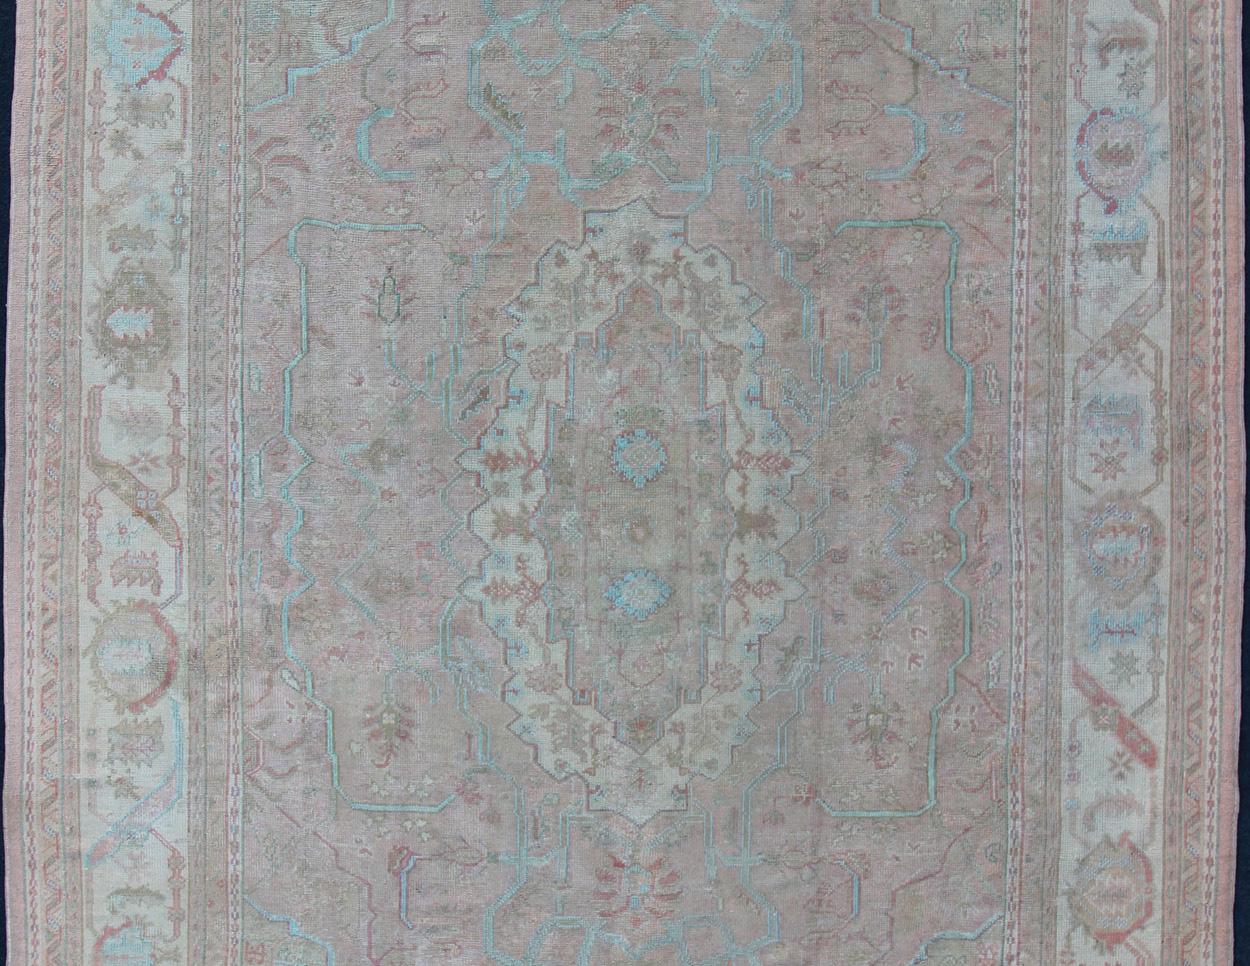 Large Antique Oushak Carpet in Light Pink Background with Light Blue Highlights. Antique Oushak carpet, Keivan Woven Arts / rug D-0501, country of origin / type: Turkey / Oushak, circa Early-20th Century.

Measures: 11'8'' x 15'1''.

This large